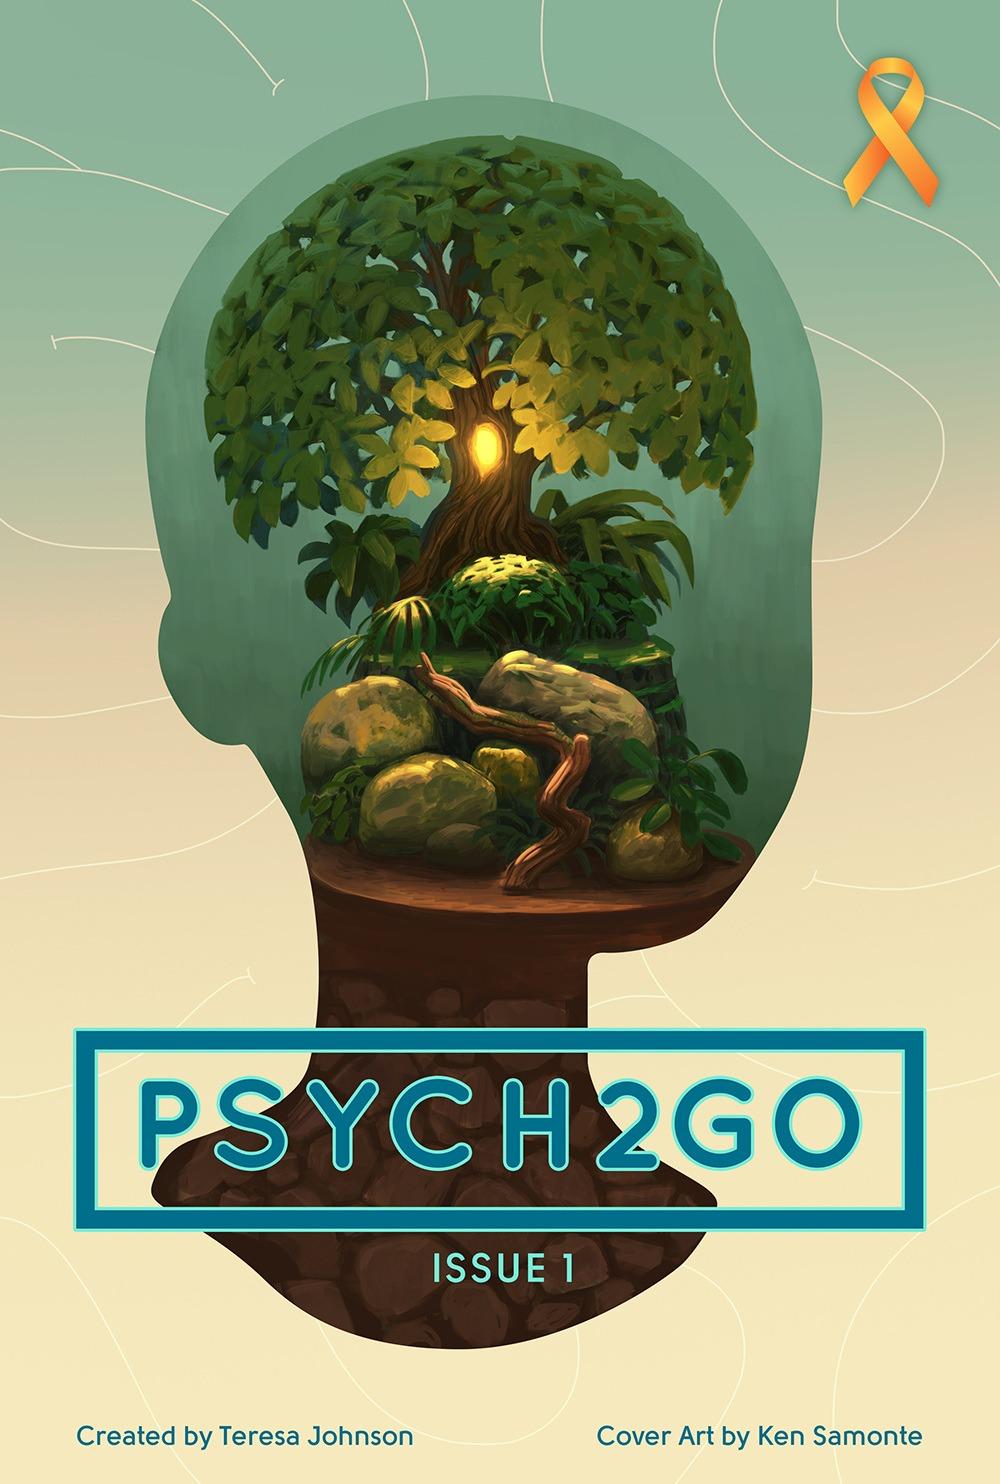 psych2go-cover-9-14-15-s_1000